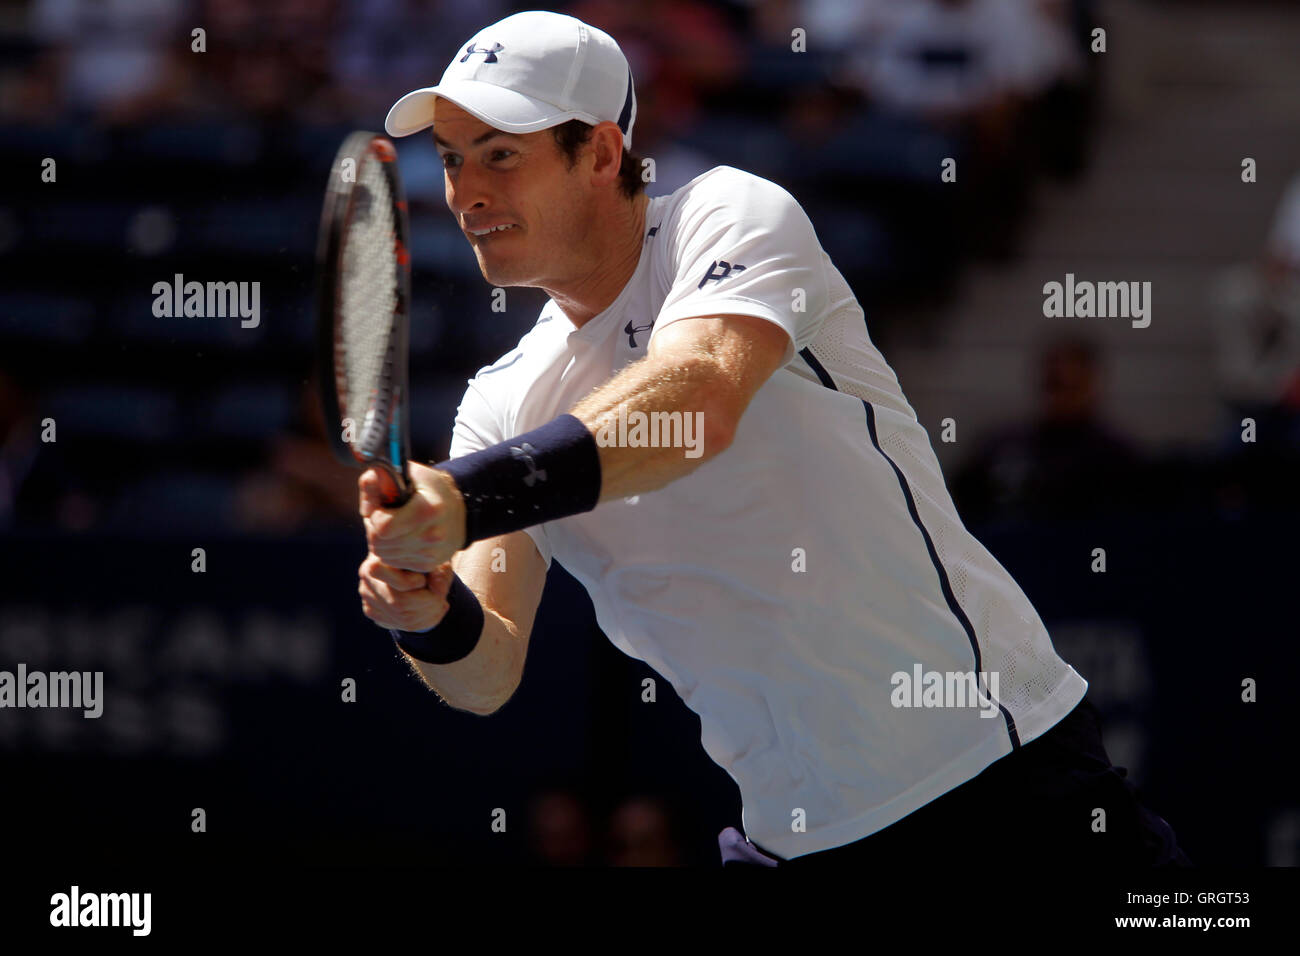 Flushing Meadows, New York, USA. 7th September, 2016. New York, USA. 7th September, 2016. Andy Murray of Great Britain during his quarter final match against Kei Nishikori of Japan at the United States Open Tennis Championships at Flushing Meadows, New York on Wednesday, September 7th © Adam Stoltman/Alamy Live News Credit:  Adam Stoltman/Alamy Live News Stock Photo